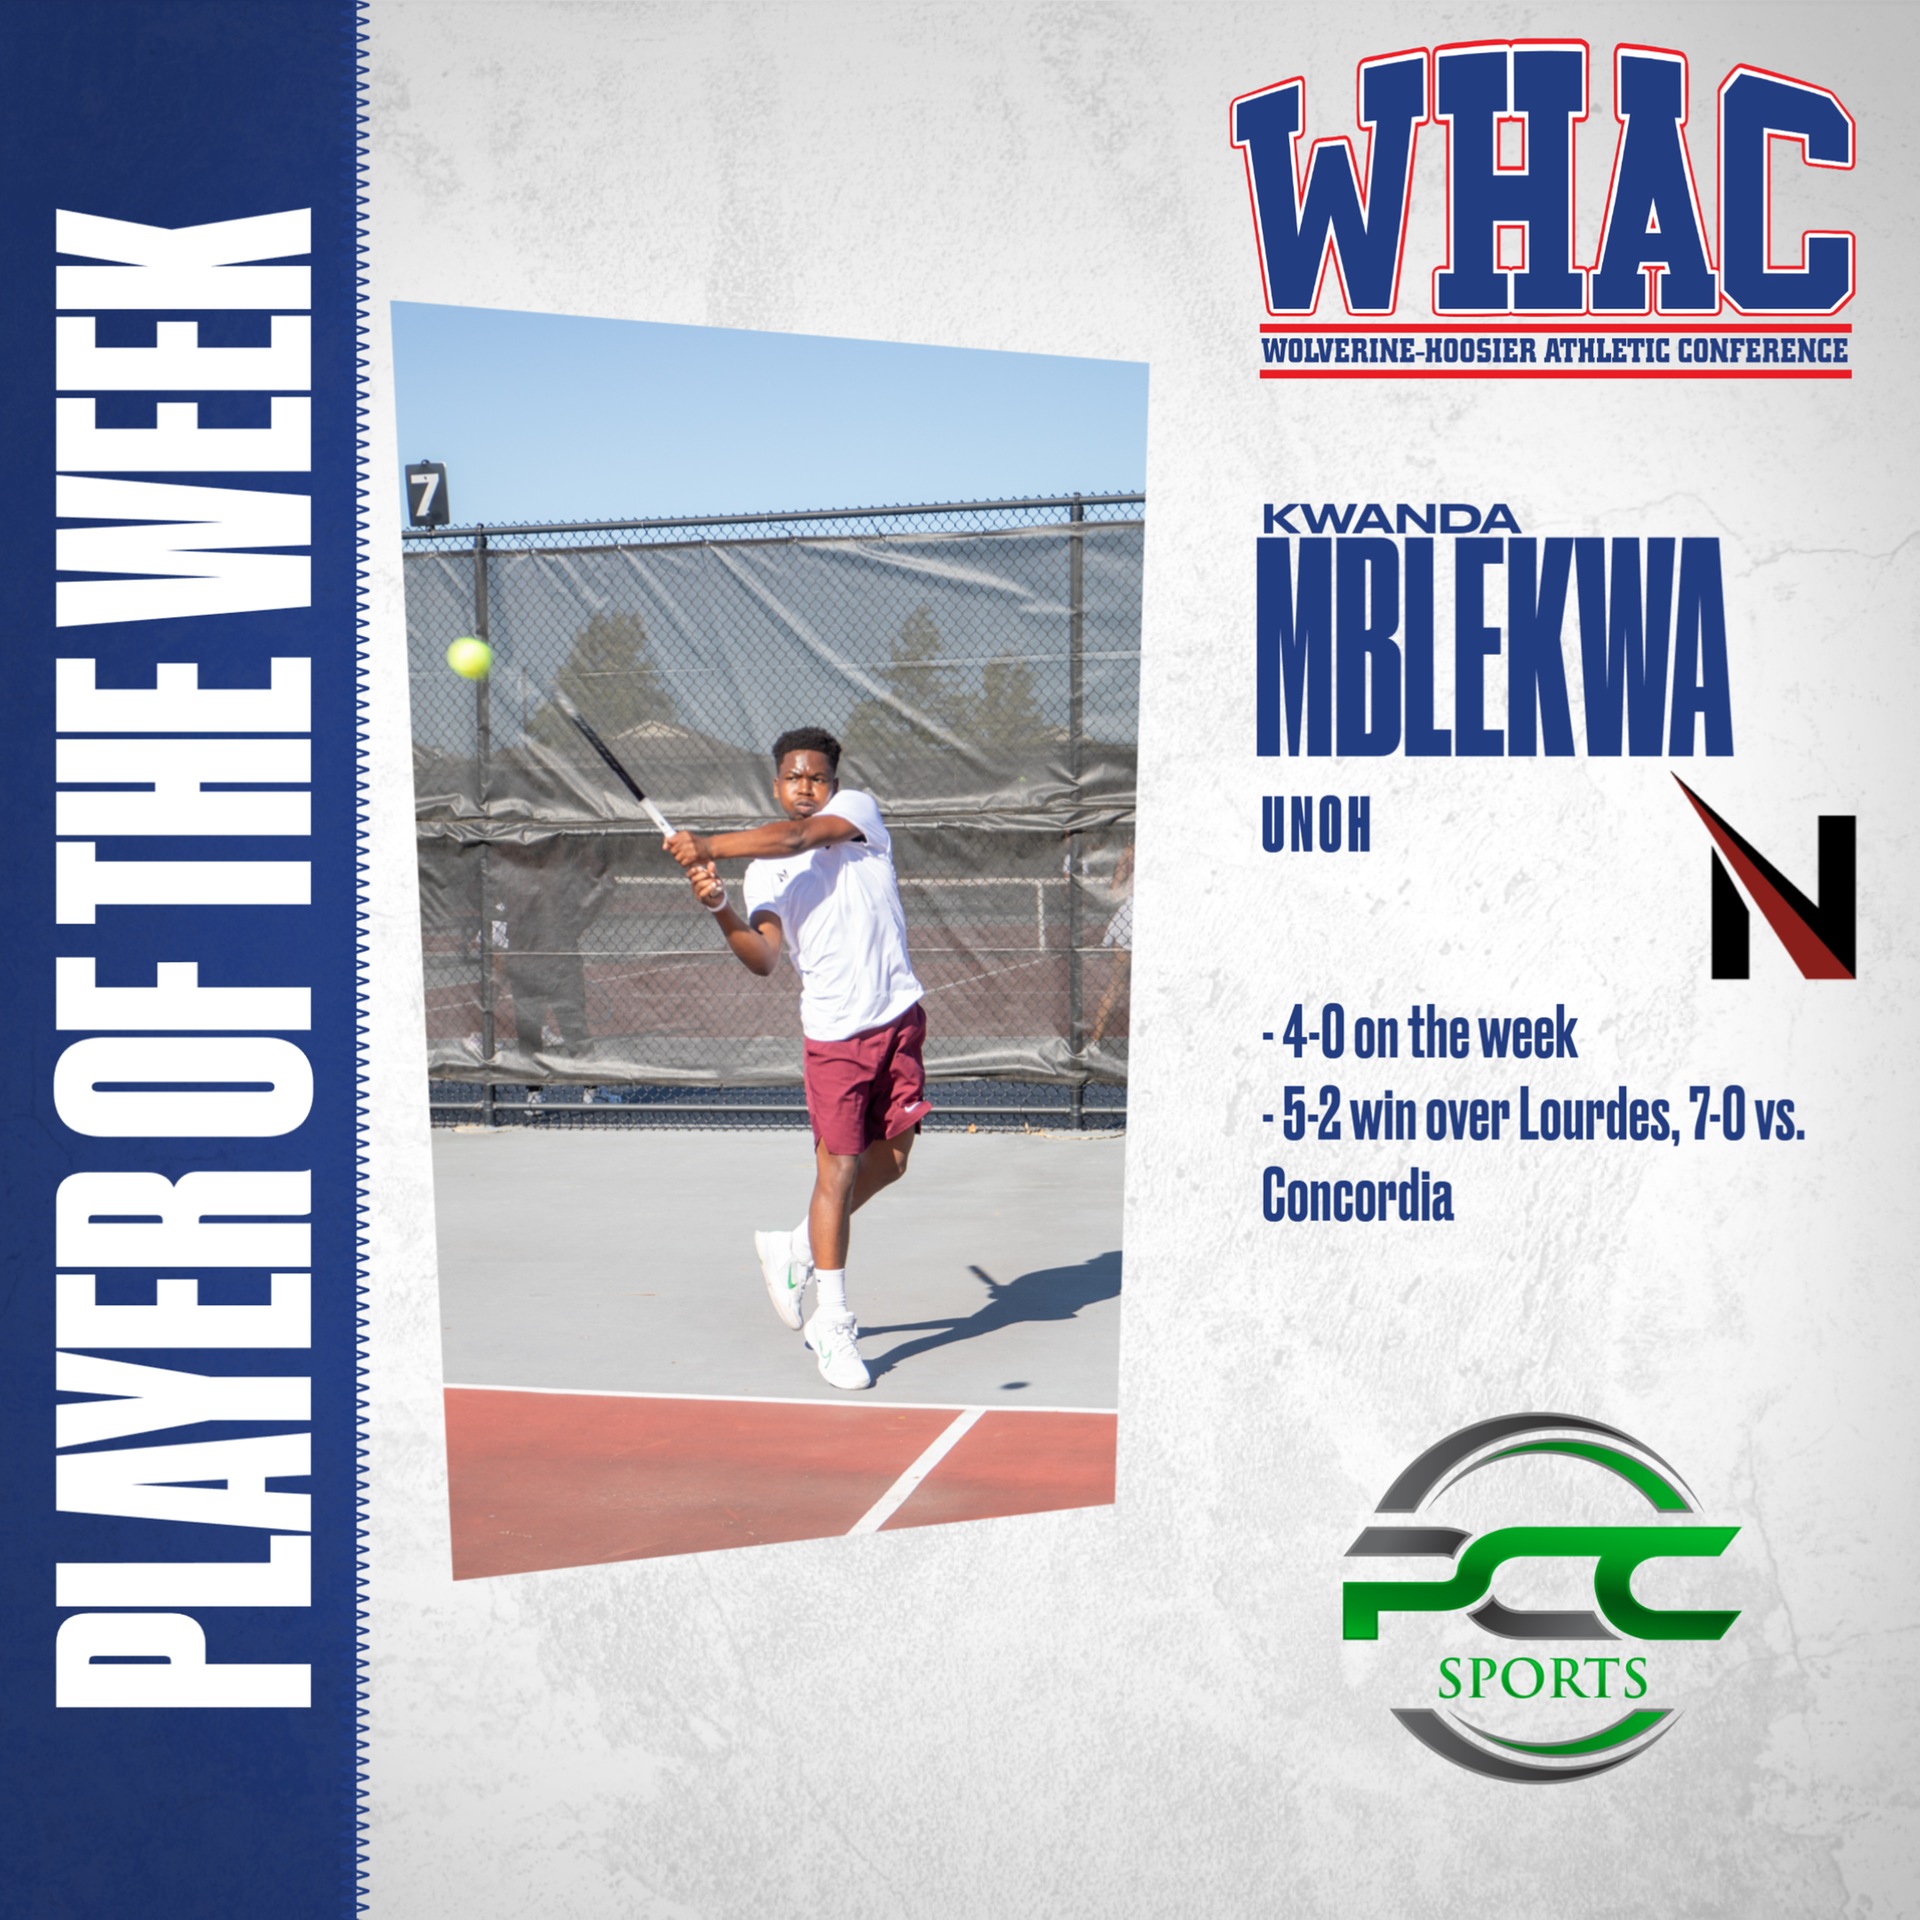 UNOH's Mblekwa wins first Tennis Player of the Week of the spring